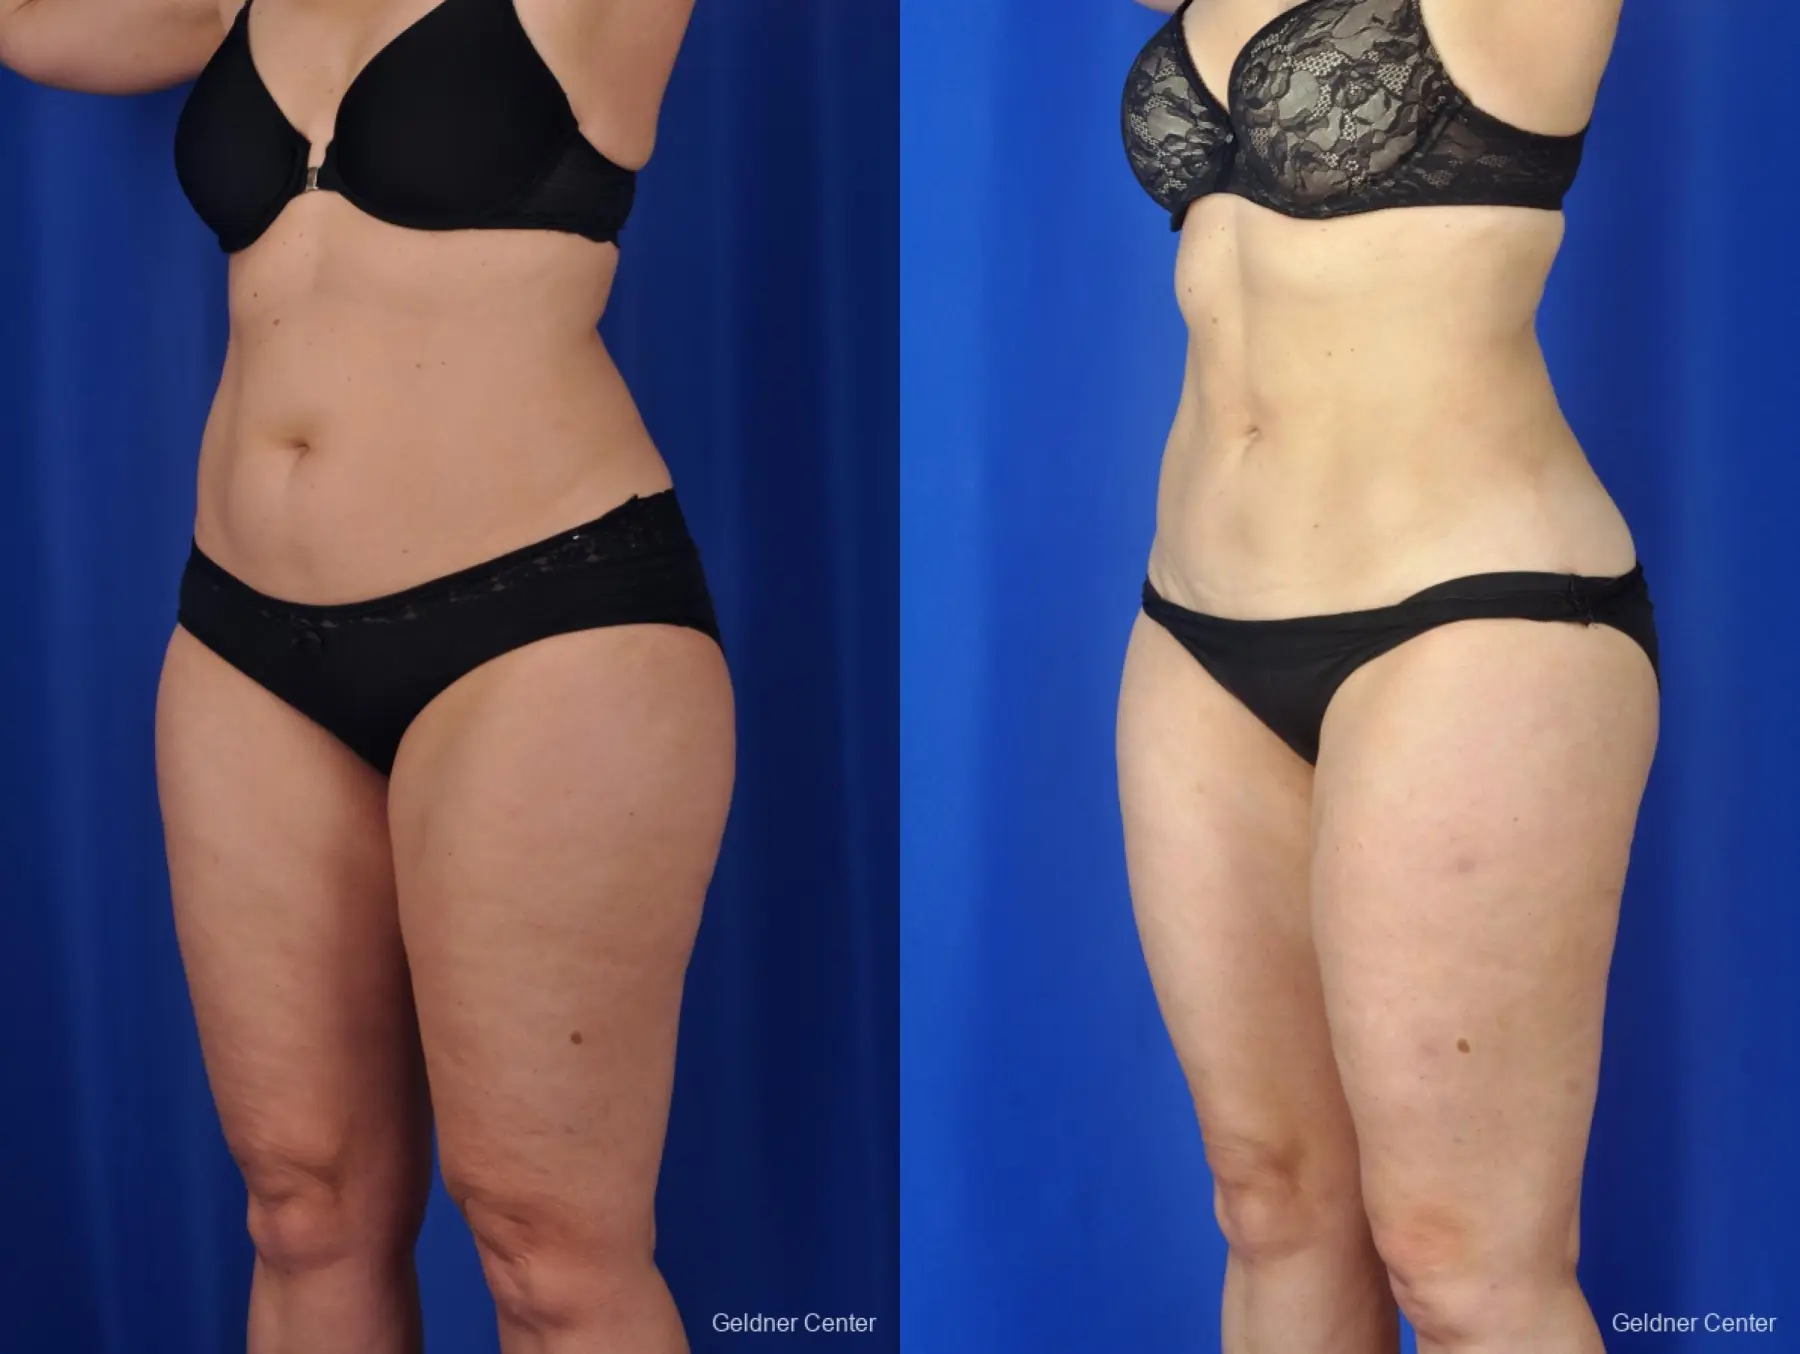 Liposuction: Patient 2 - Before and After 5